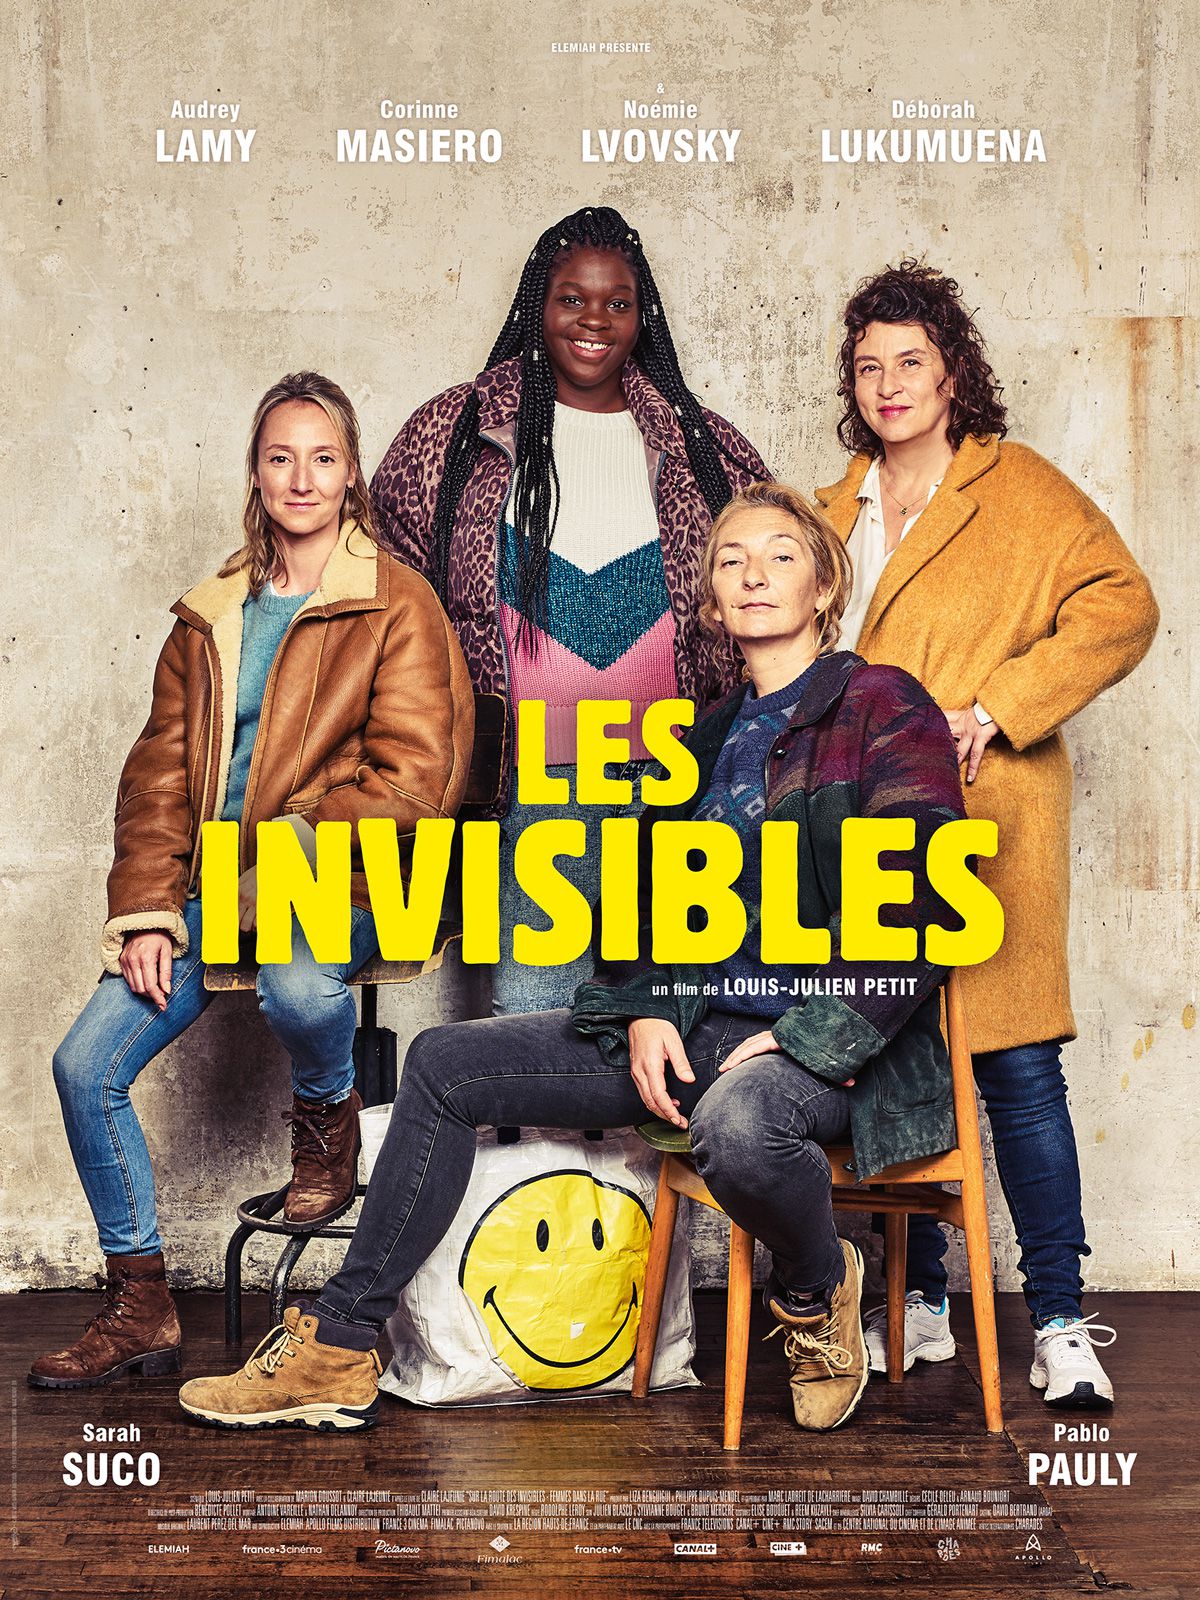 Les Invisibles - Film (2019) streaming VF gratuit complet